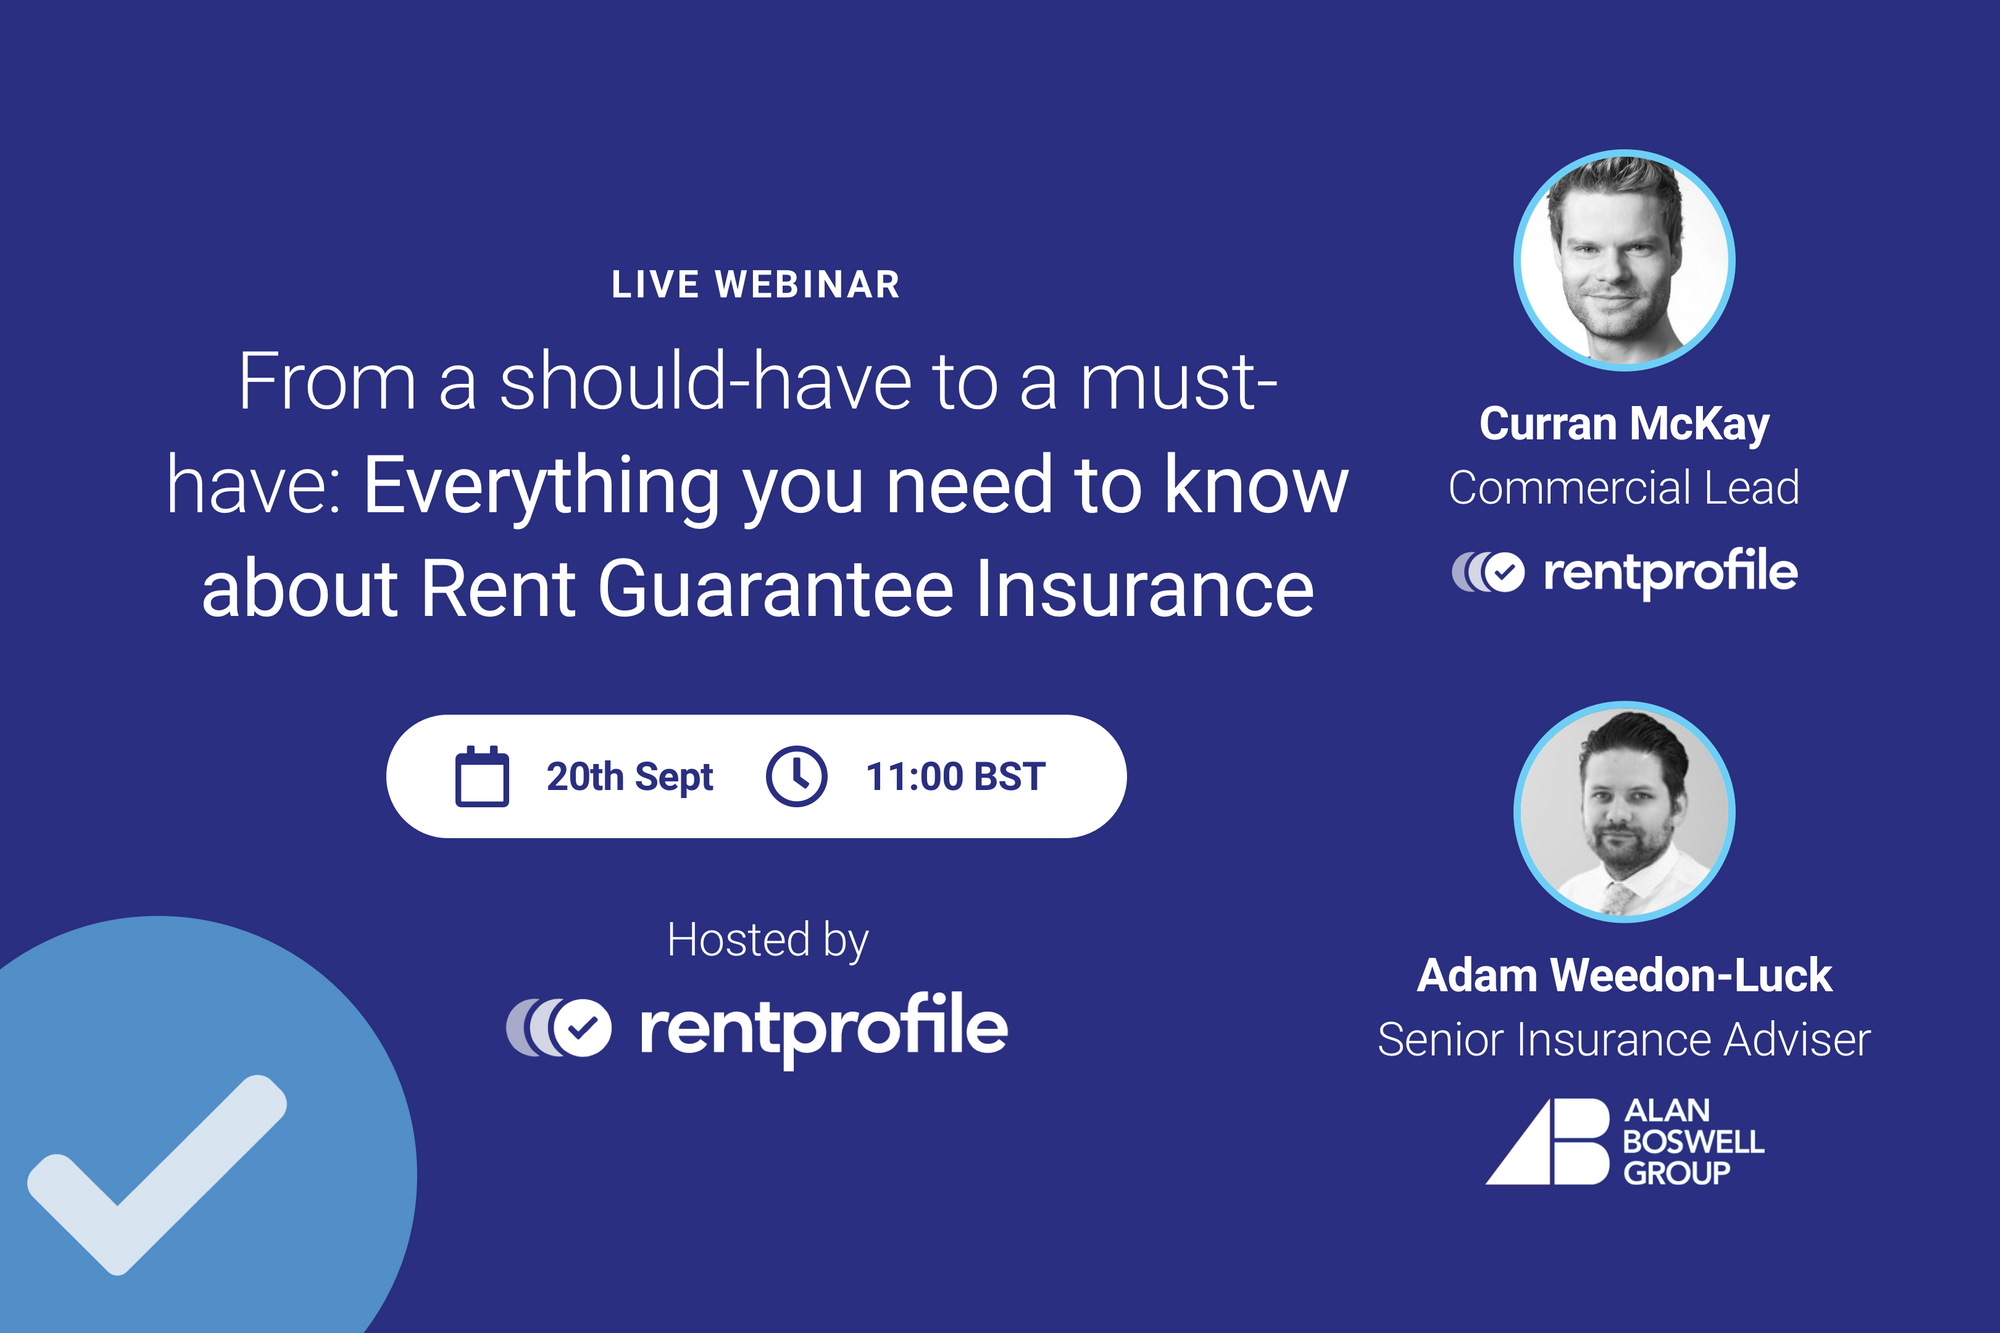 [Webinar] From a should-have to a must-have: Everything you need to know about Rent Guarantee Insurance